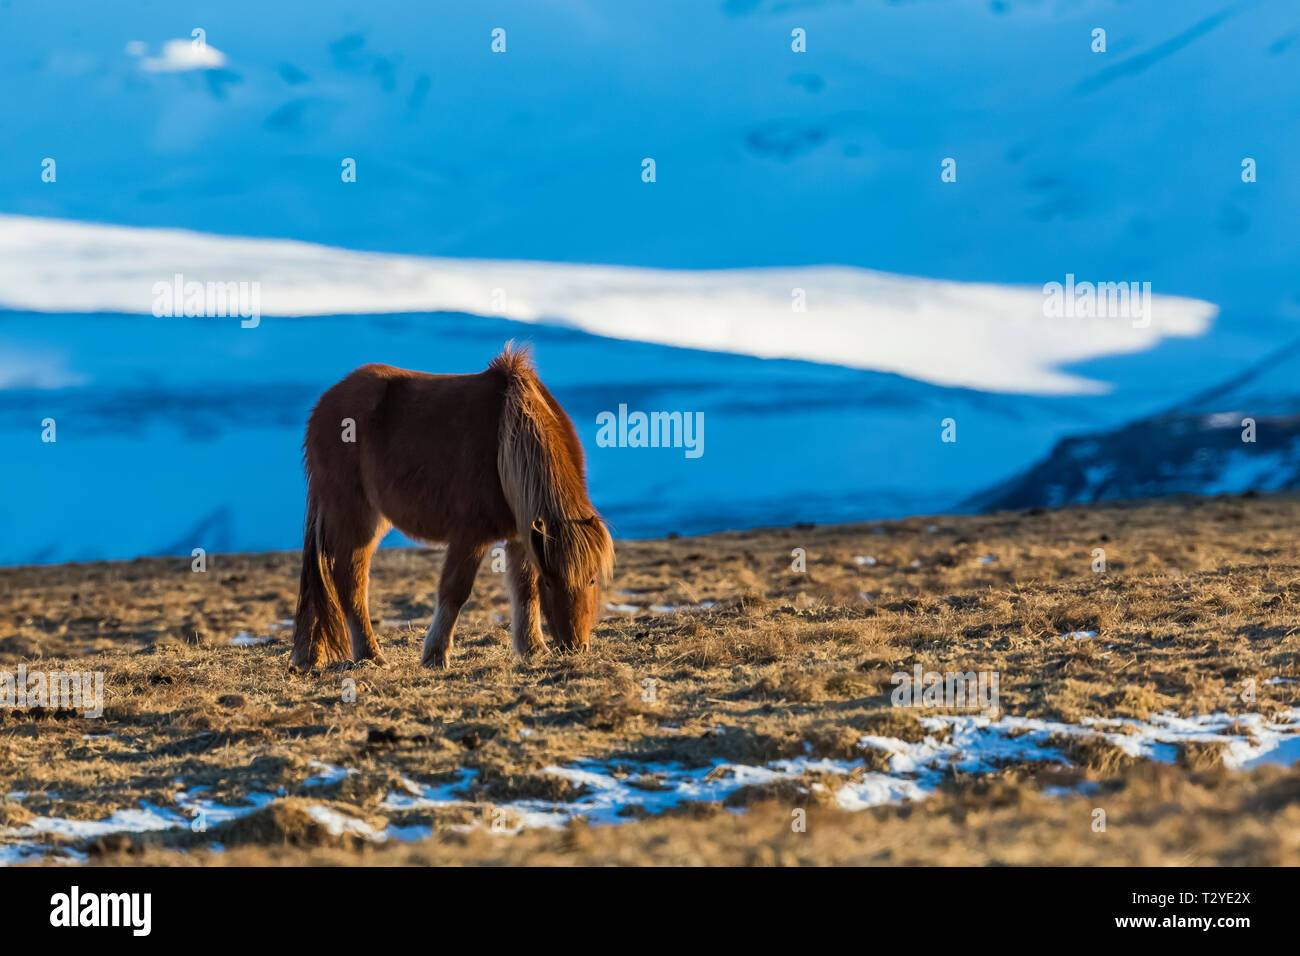 Icelandic Horses, a hardy breed use for work and pleasure in this horse-loving culture, on the Snæfellsnes Peninsula of Iceland Stock Photo